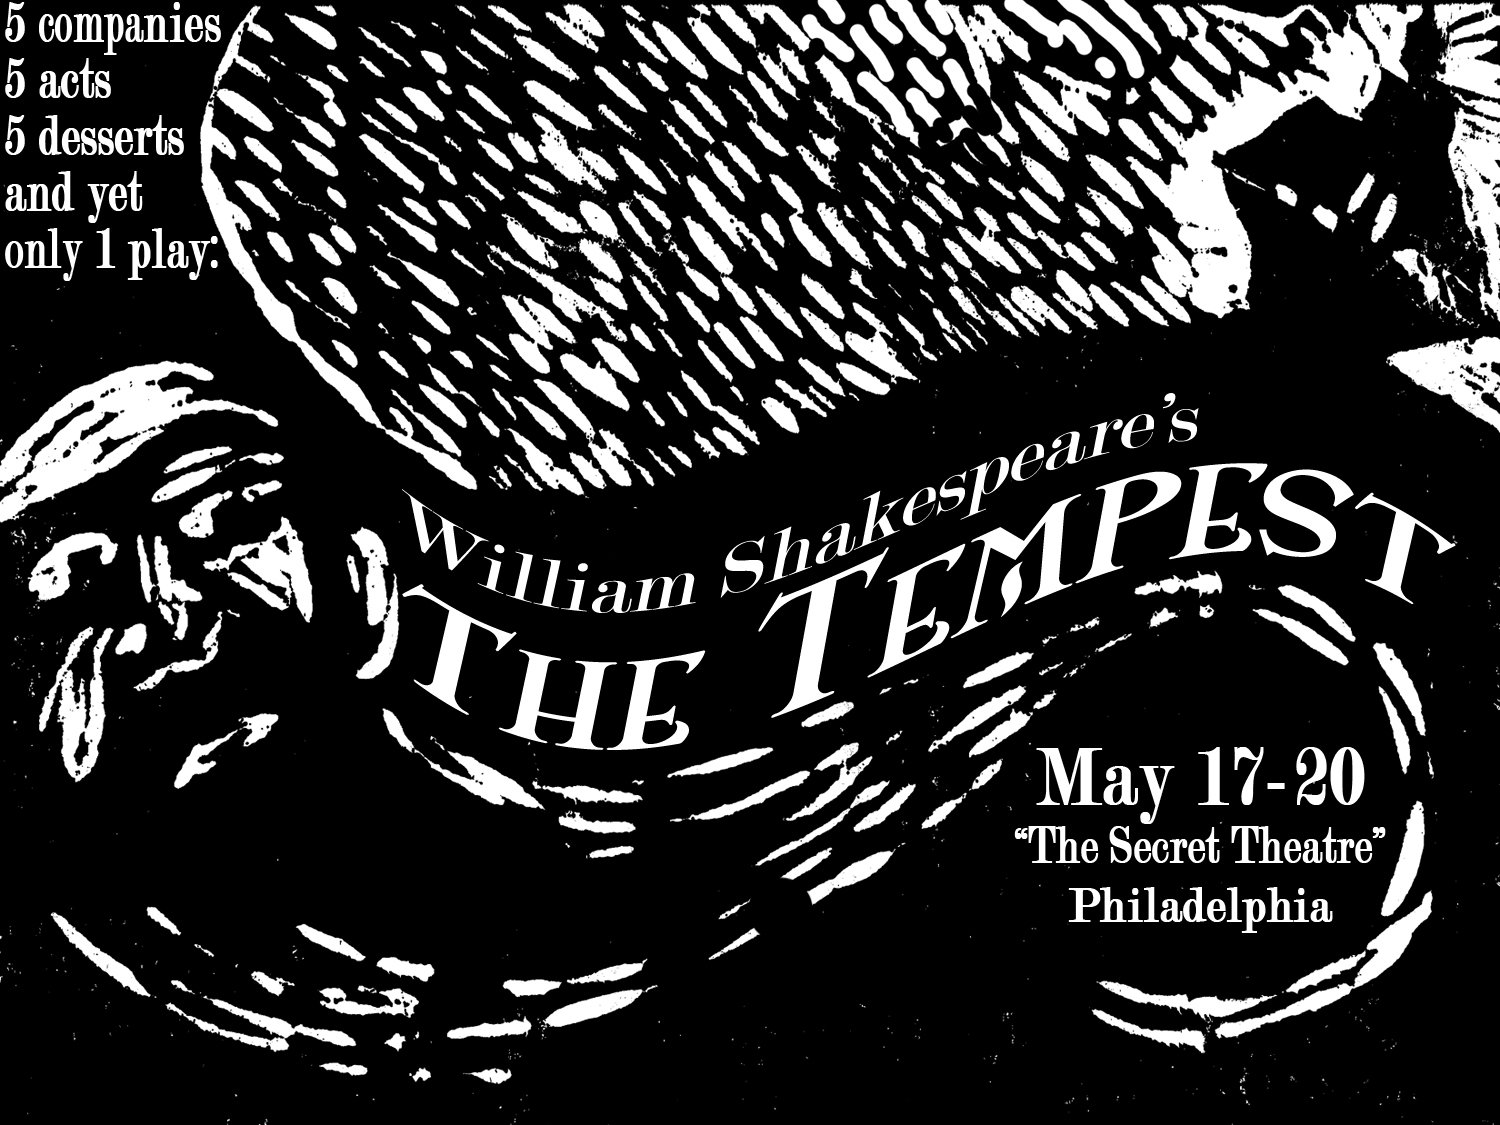 The Tempest 2007 Showcard